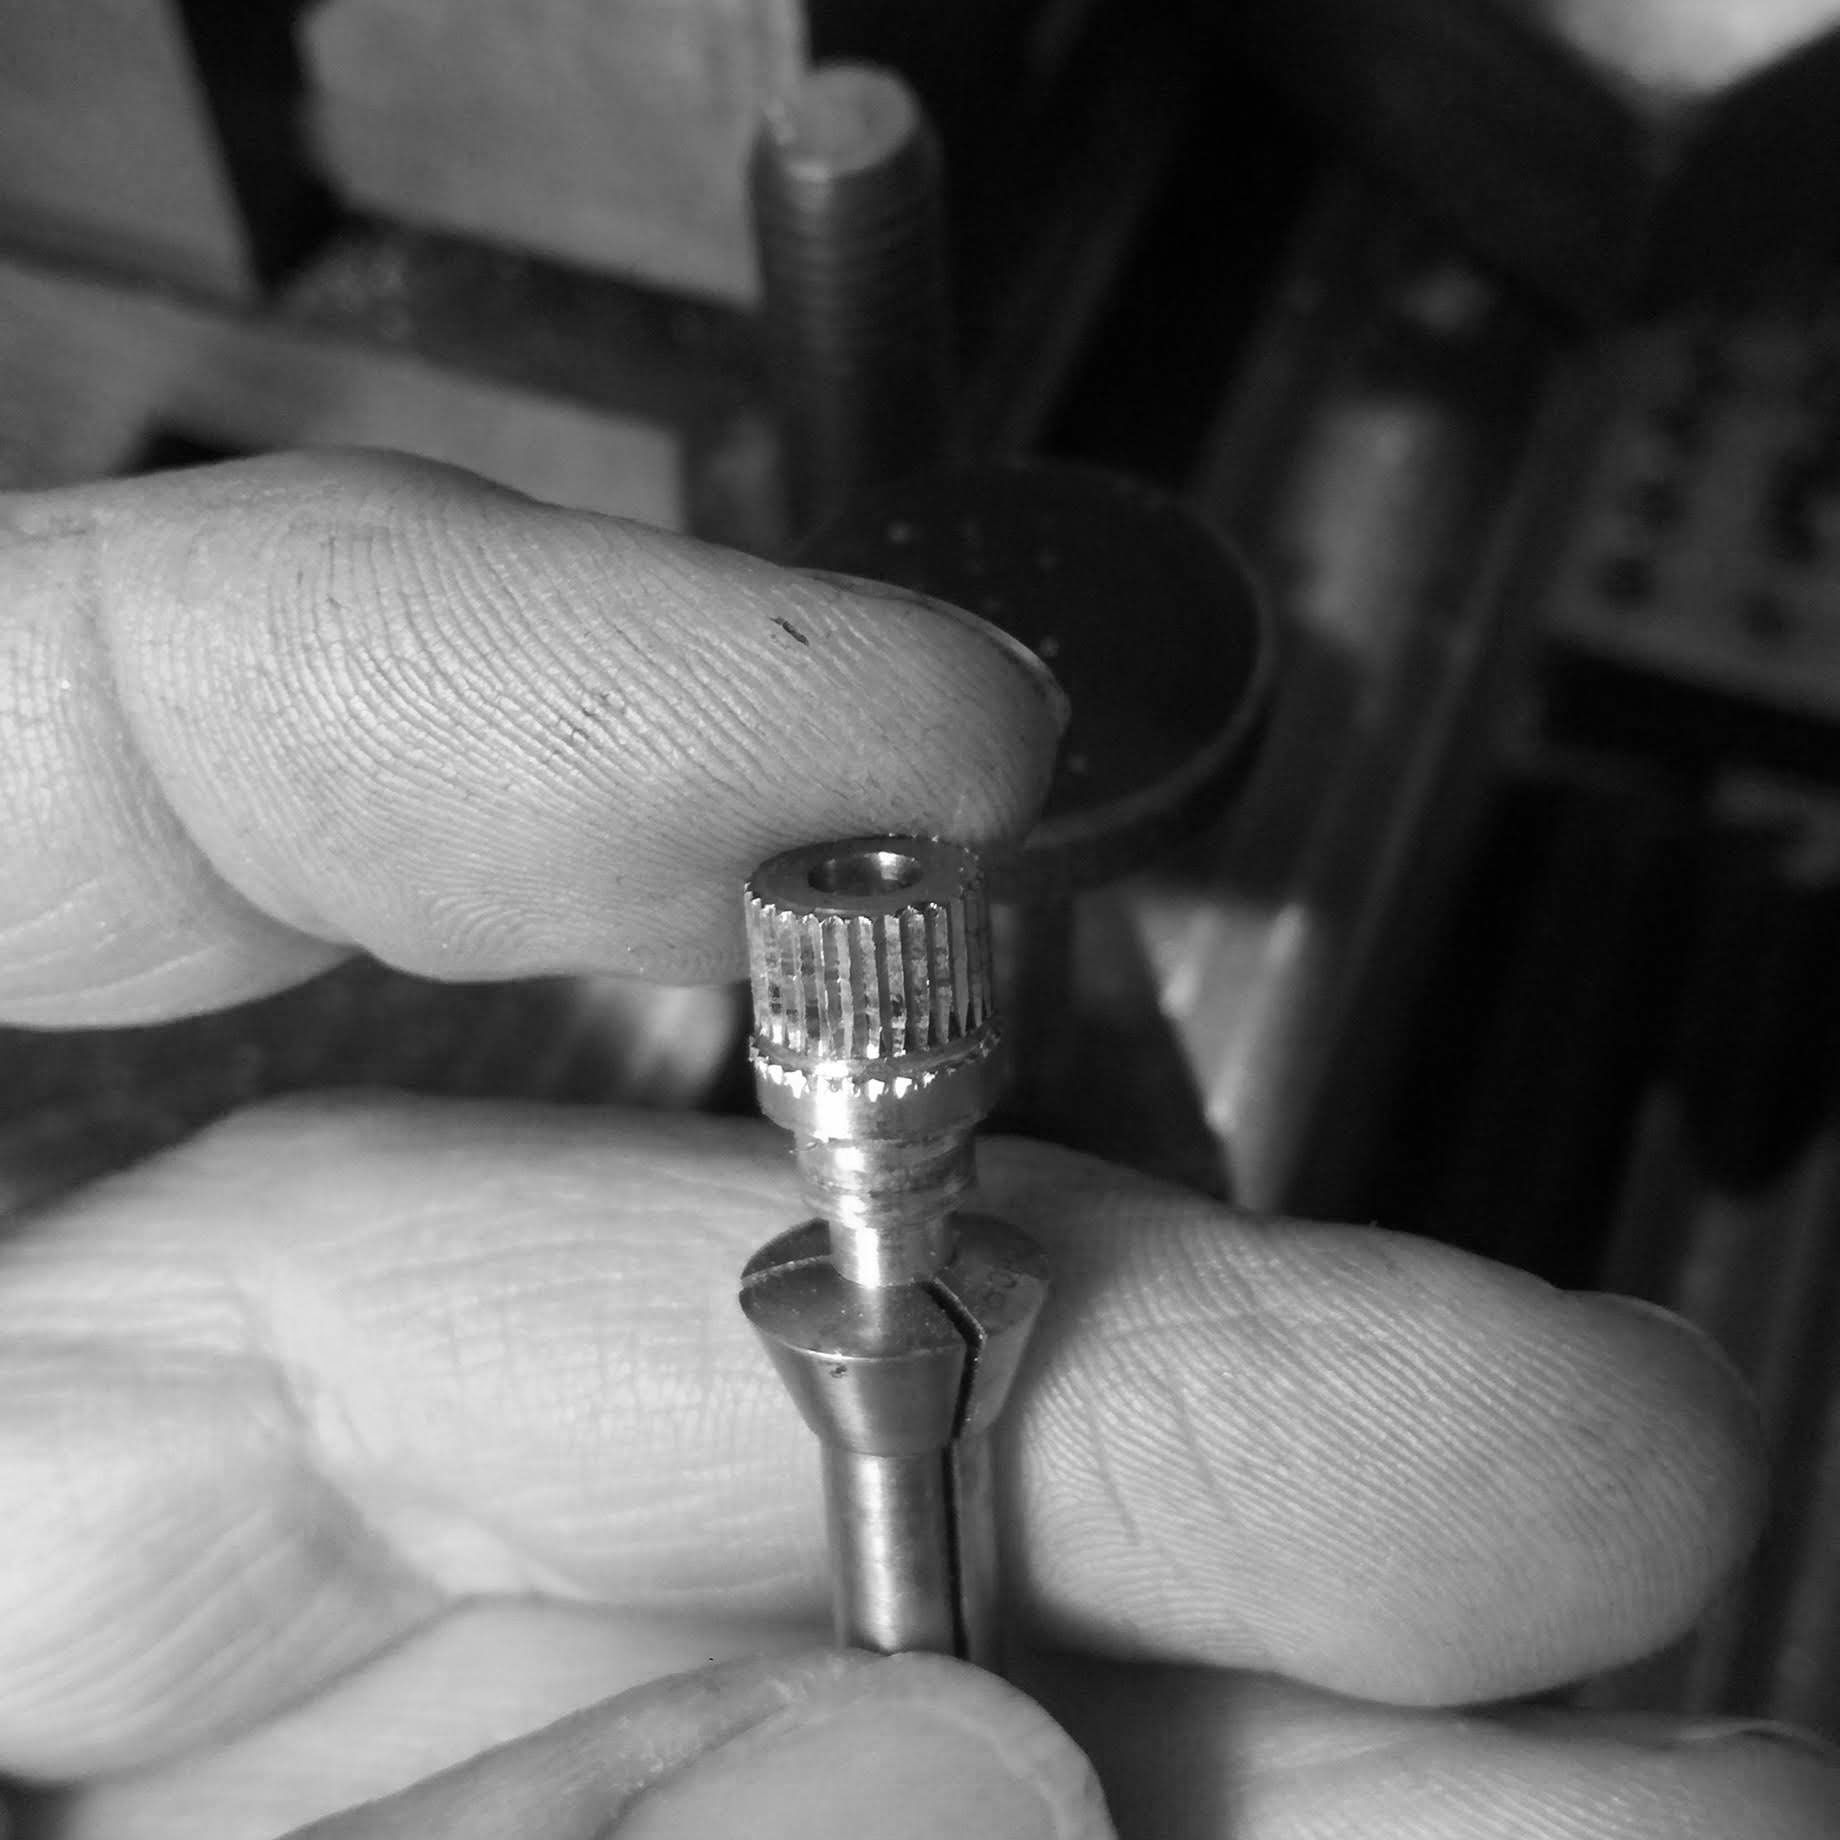 The first crown after indexing the 30 individual ridges of the grip.